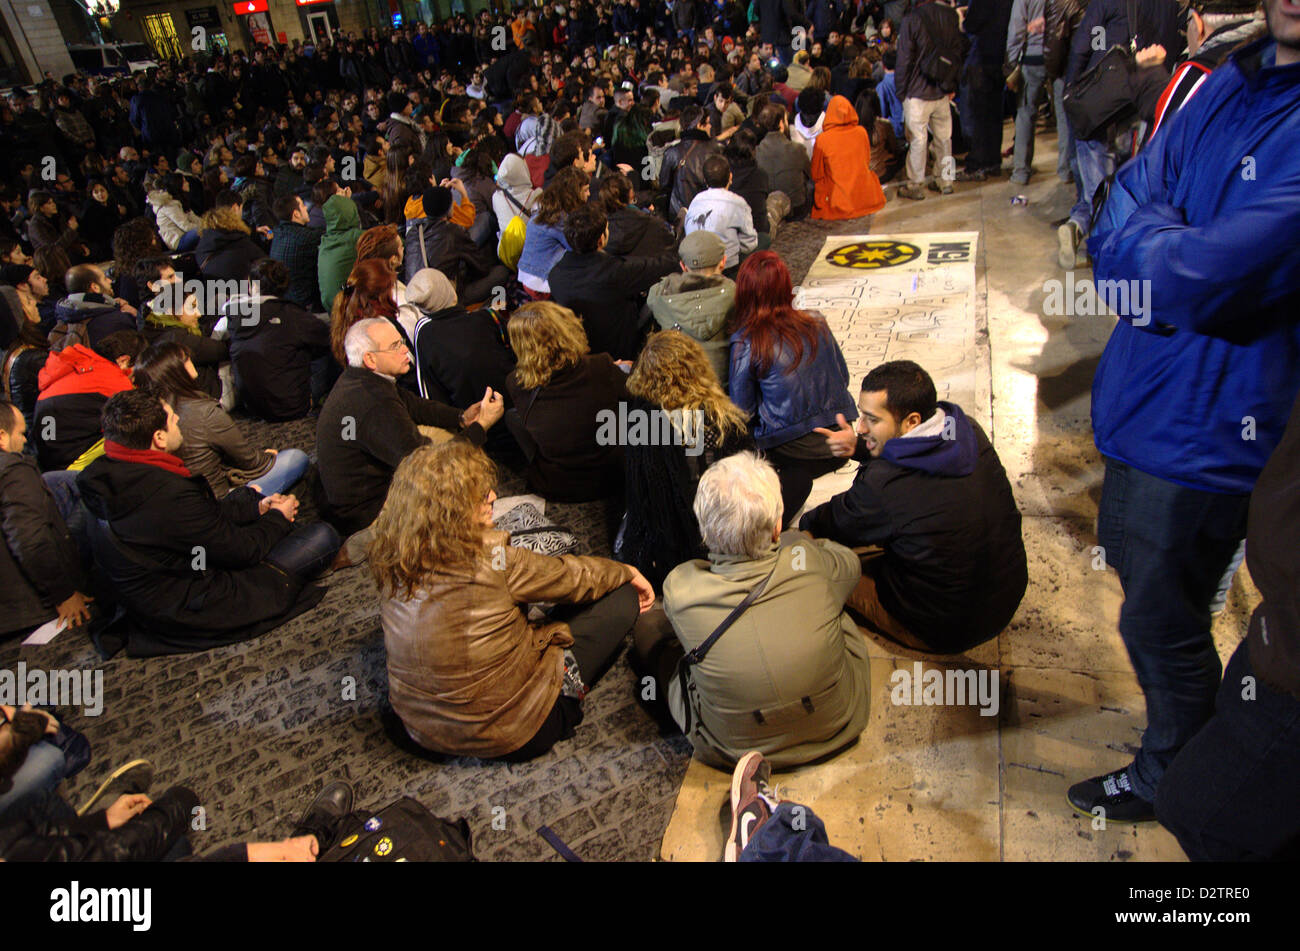 Demonstration of the 'indignados' tonight against secret bonuses in the spanish governtment and corruption. The demonstration ended in the Sant Jaume square of Barcelona. Stock Photo